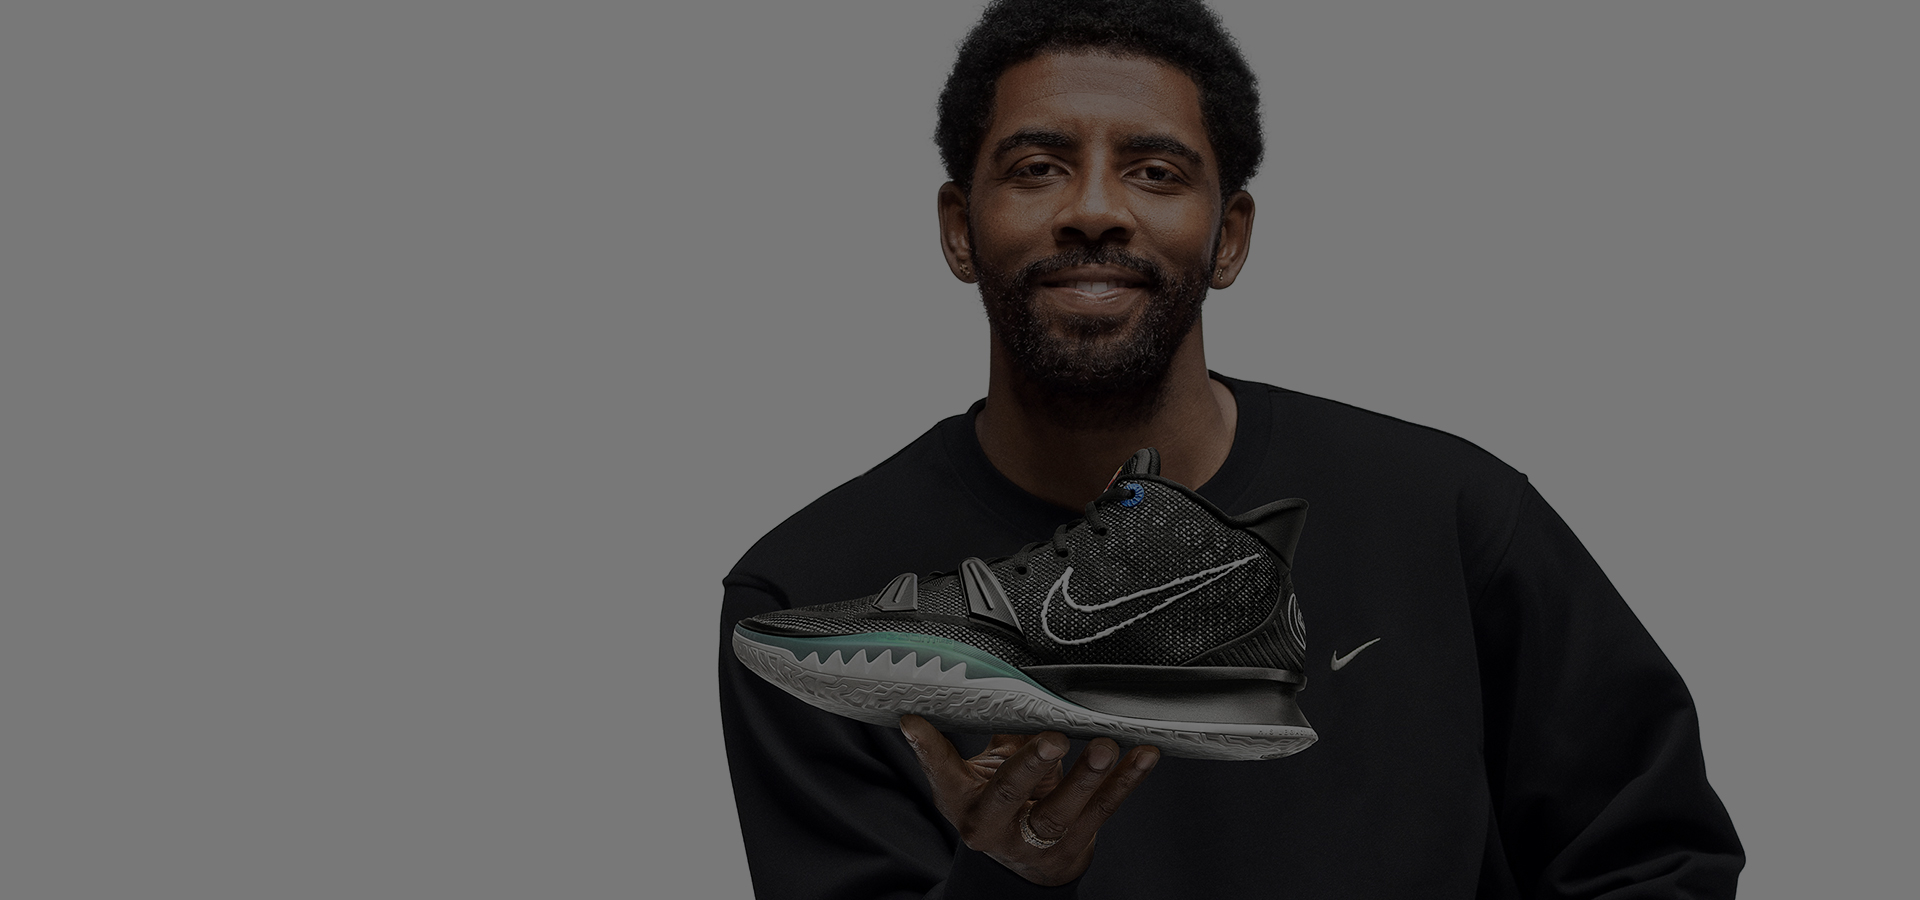 Kyrie Irving’s Multifaceted Interests Lead The Way For The Nike Kyrie 7